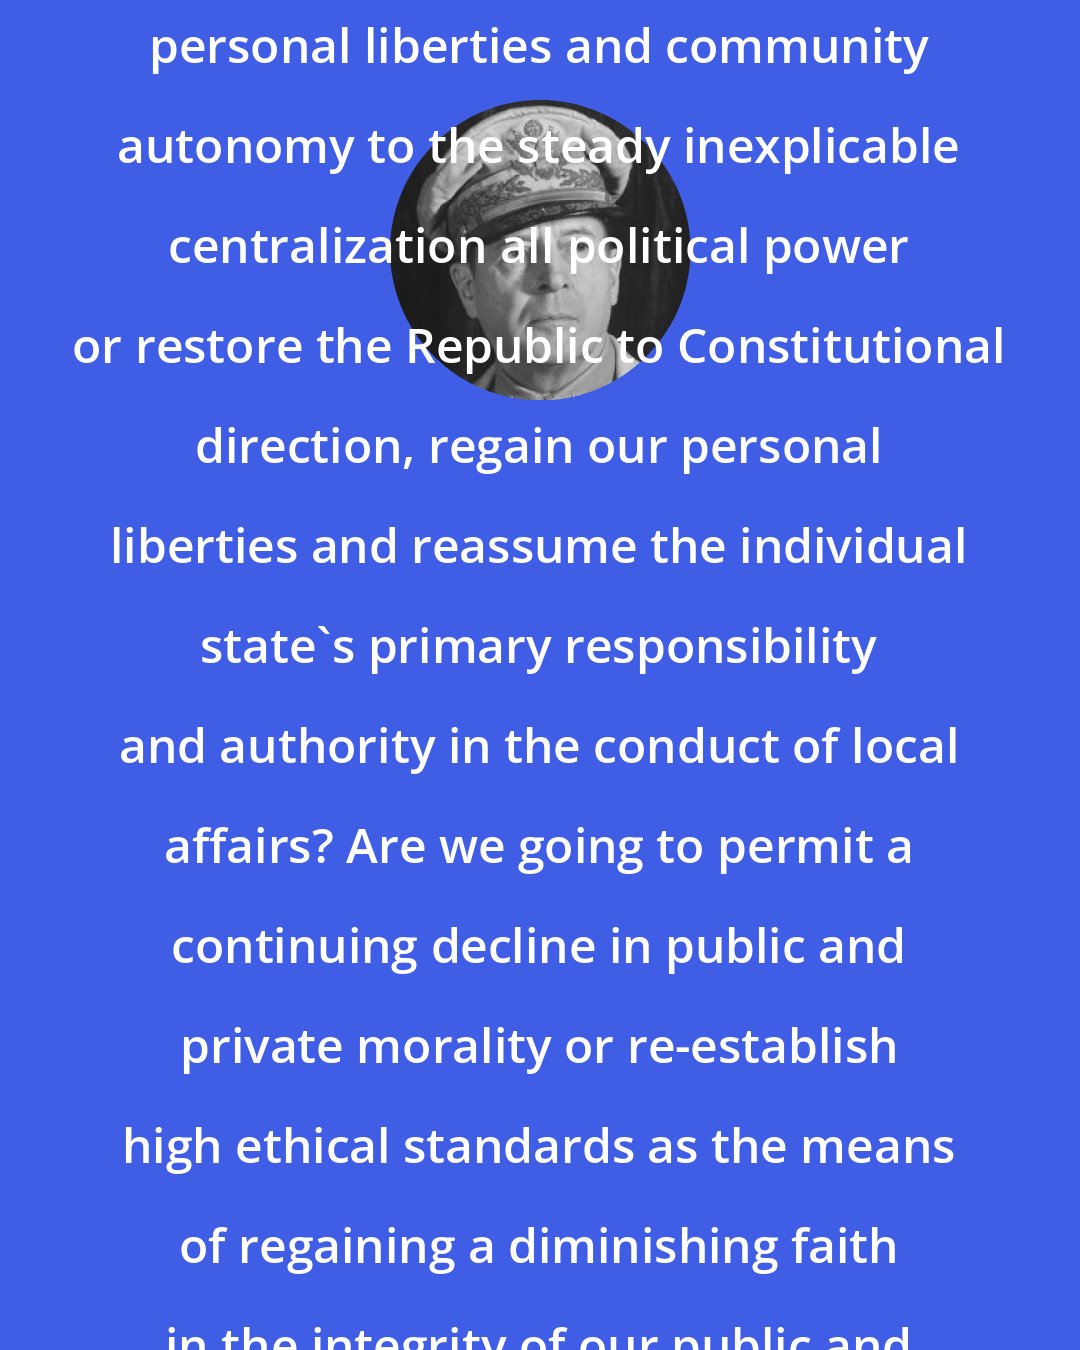 Douglas MacArthur: Are we going to continue to yield personal liberties and community autonomy to the steady inexplicable centralization all political power or restore the Republic to Constitutional direction, regain our personal liberties and reassume the individual state's primary responsibility and authority in the conduct of local affairs? Are we going to permit a continuing decline in public and private morality or re-establish high ethical standards as the means of regaining a diminishing faith in the integrity of our public and private institutions?